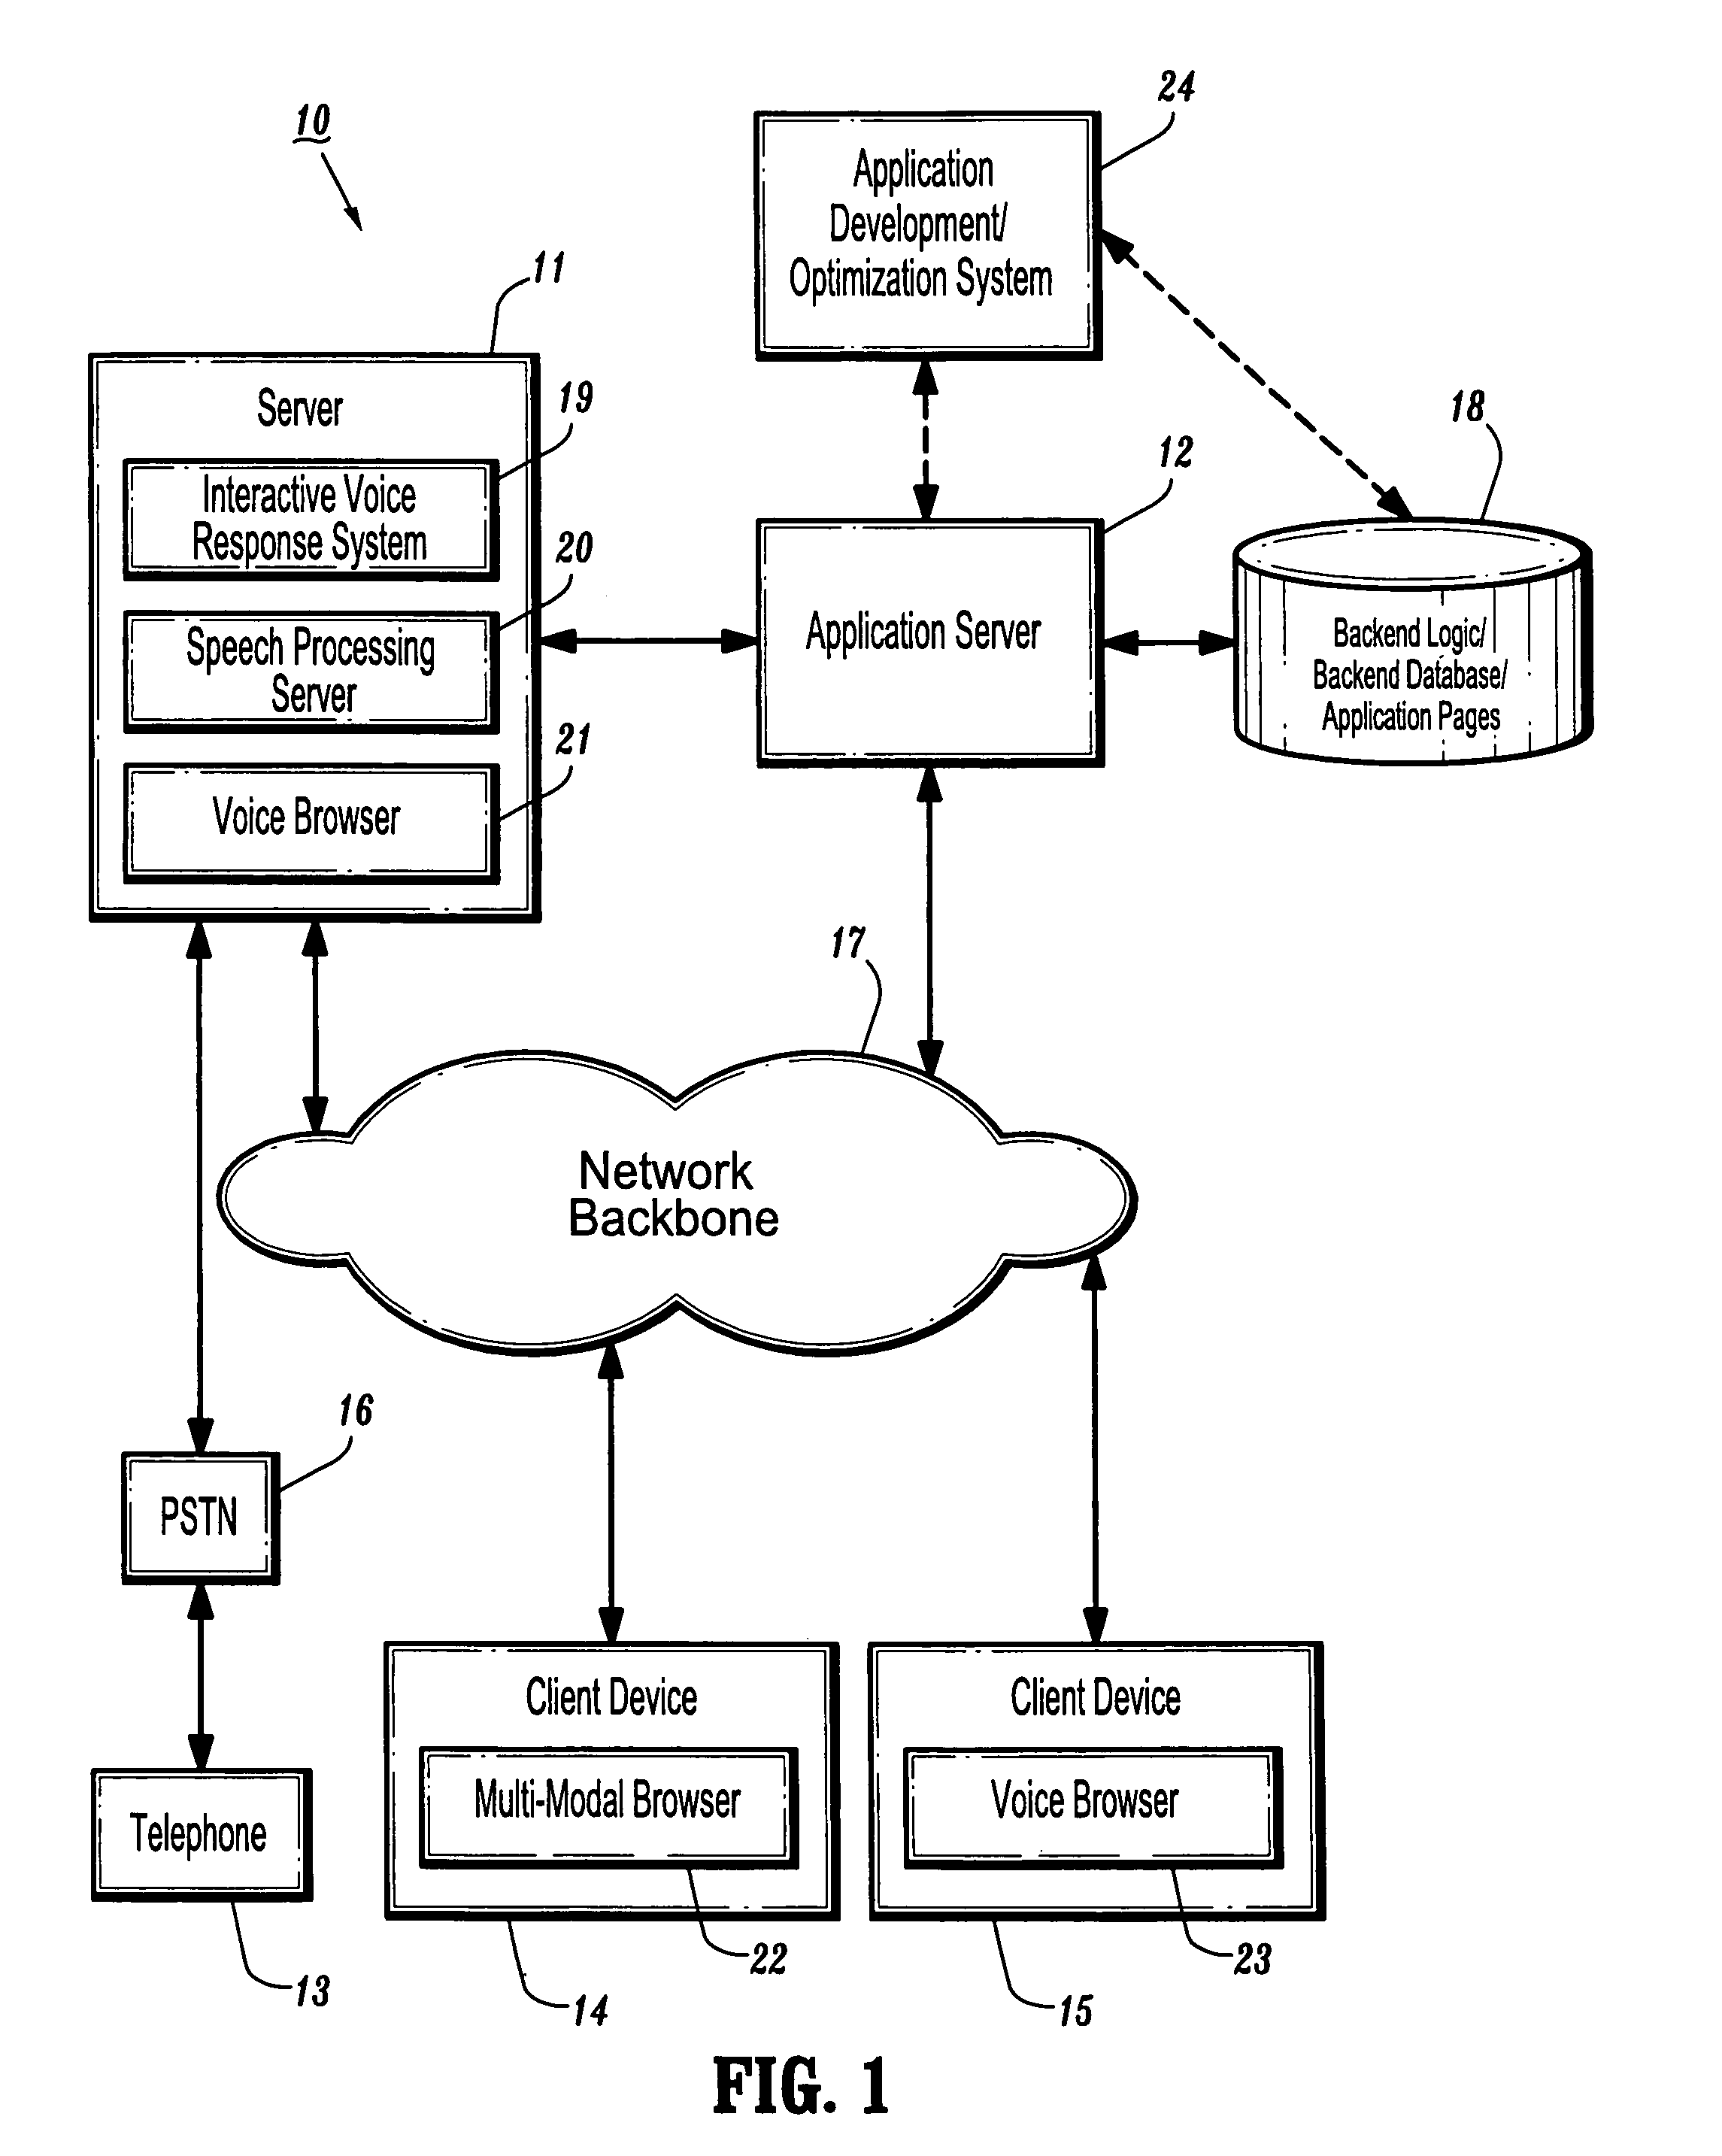 Systems and methods for generating applications that are automatically optimized for network performance